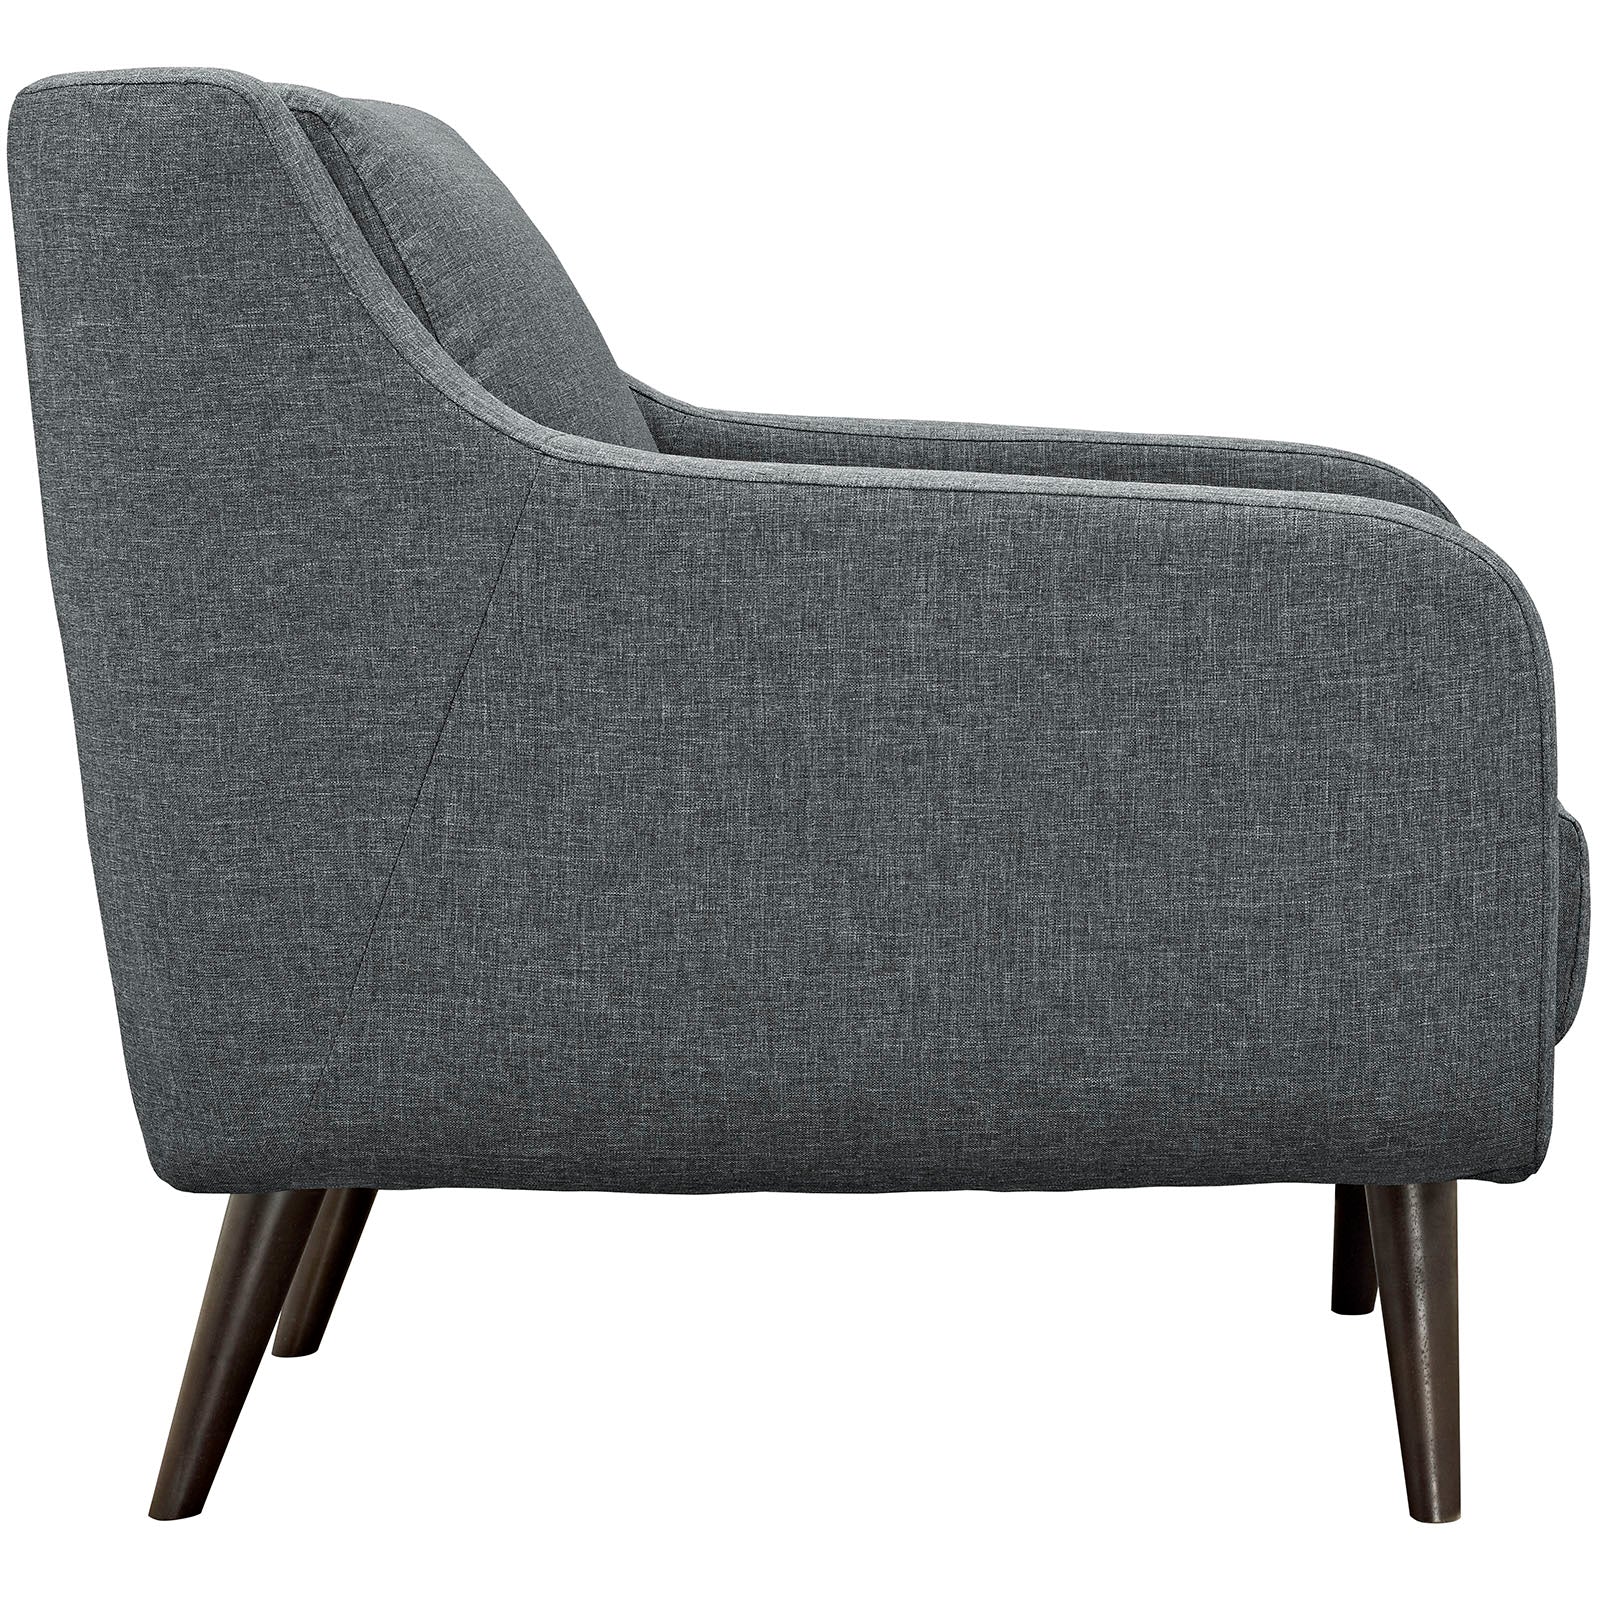 Modway Accent Chairs - Verve Upholstered Fabric Armchair Gray